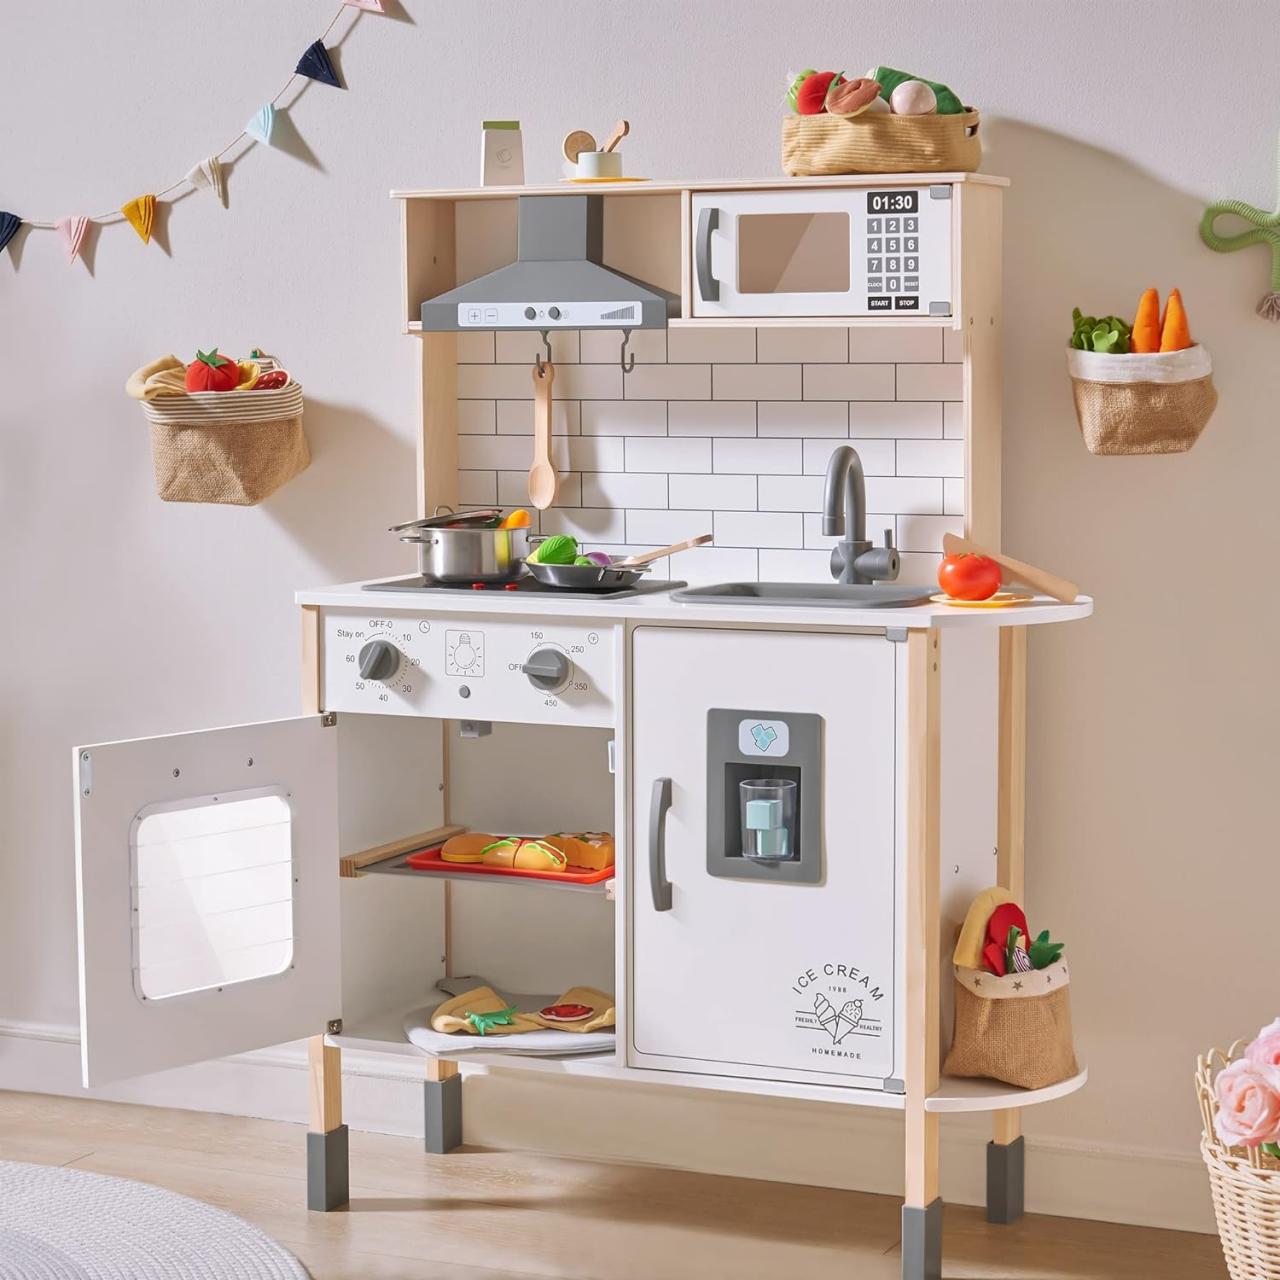 https://food.fnr.sndimg.com/content/dam/images/food/products/2023/12/18/rx_amazon_tiny-land-wooden-play-kitchen.jpeg.rend.hgtvcom.1280.1280.suffix/1702946737954.jpeg